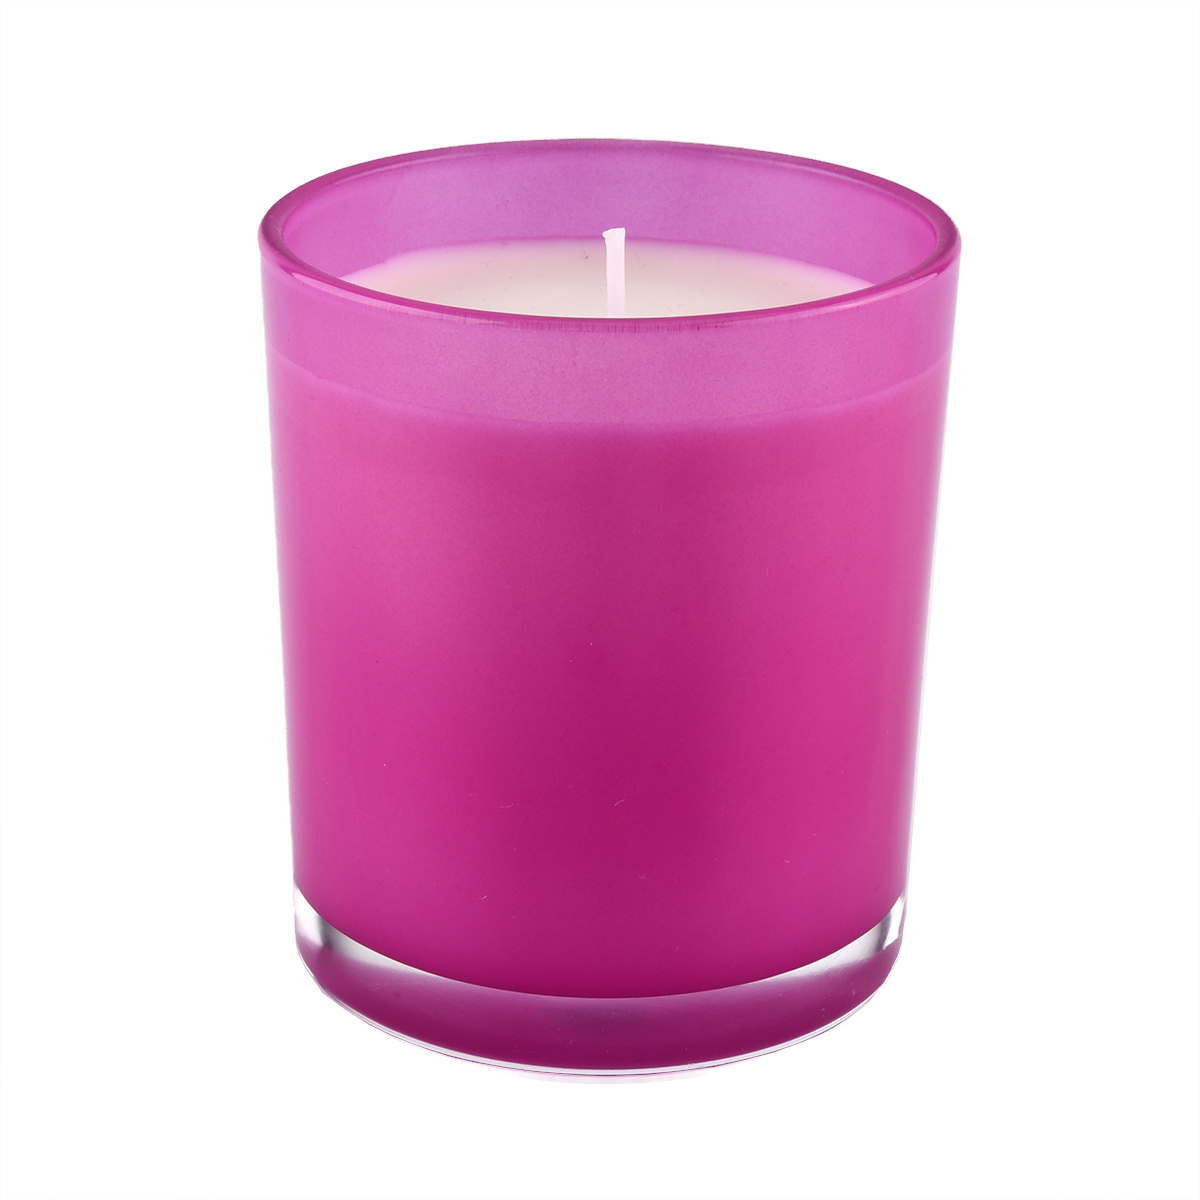 Translucent Luxury Ombre Rosa Candle Jar